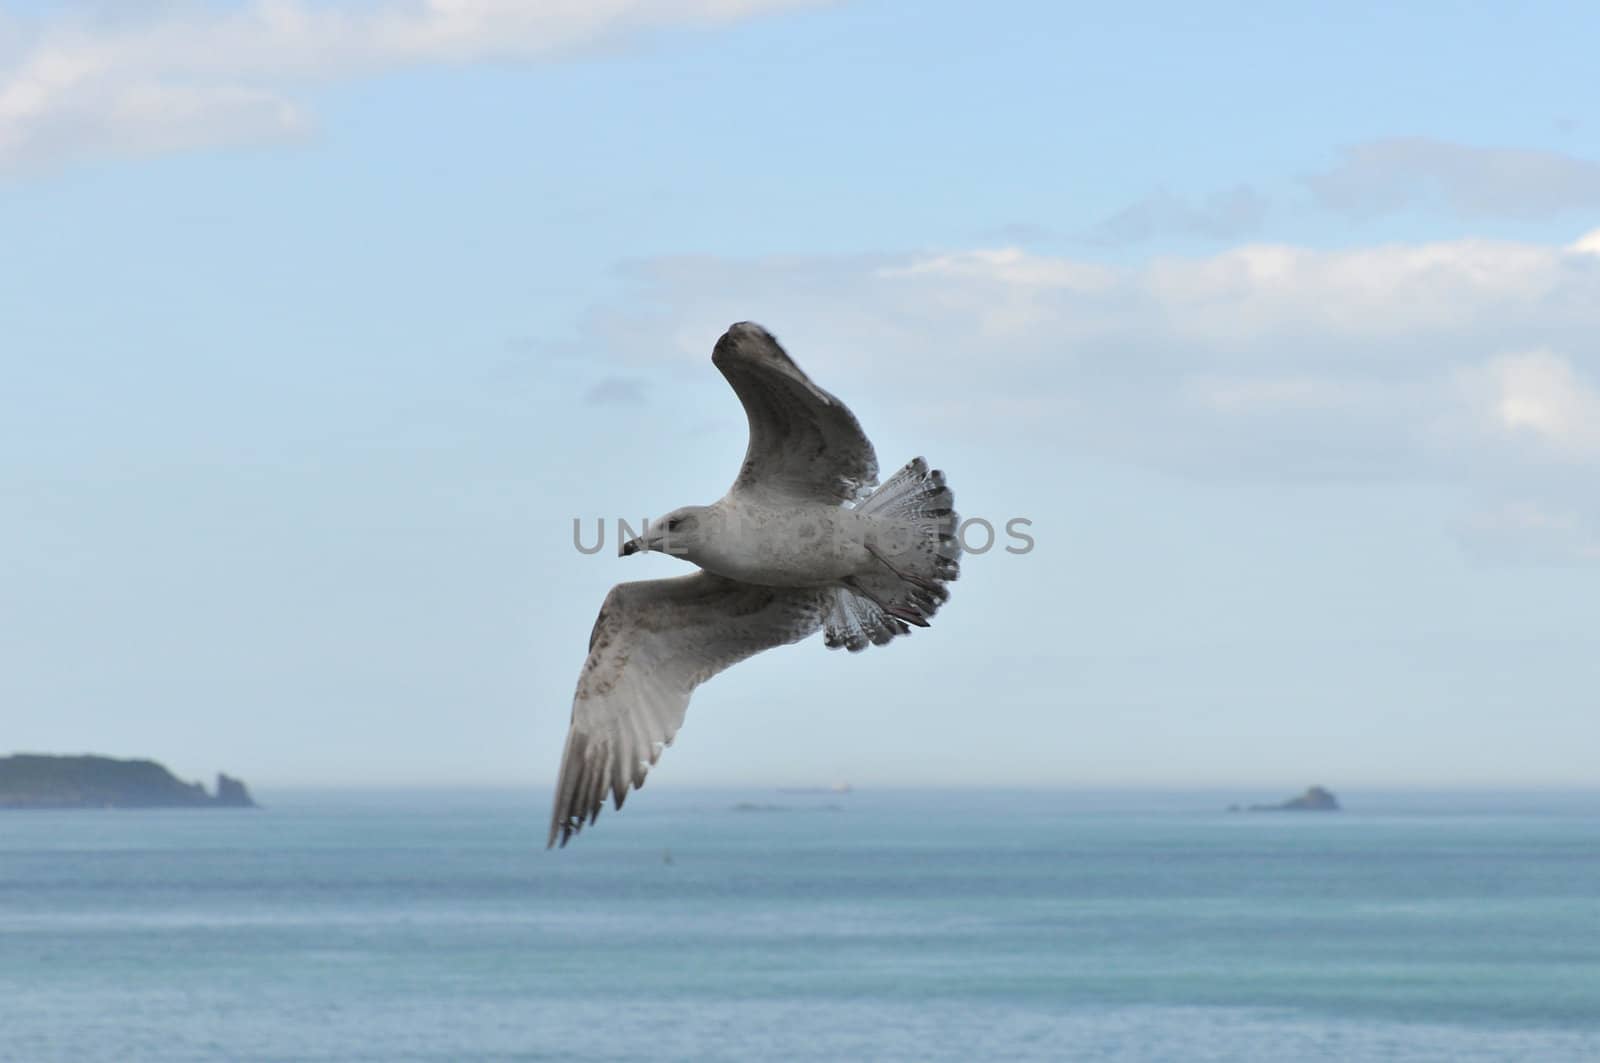 Seagull in flight with the sea and a blue sky by shkyo30